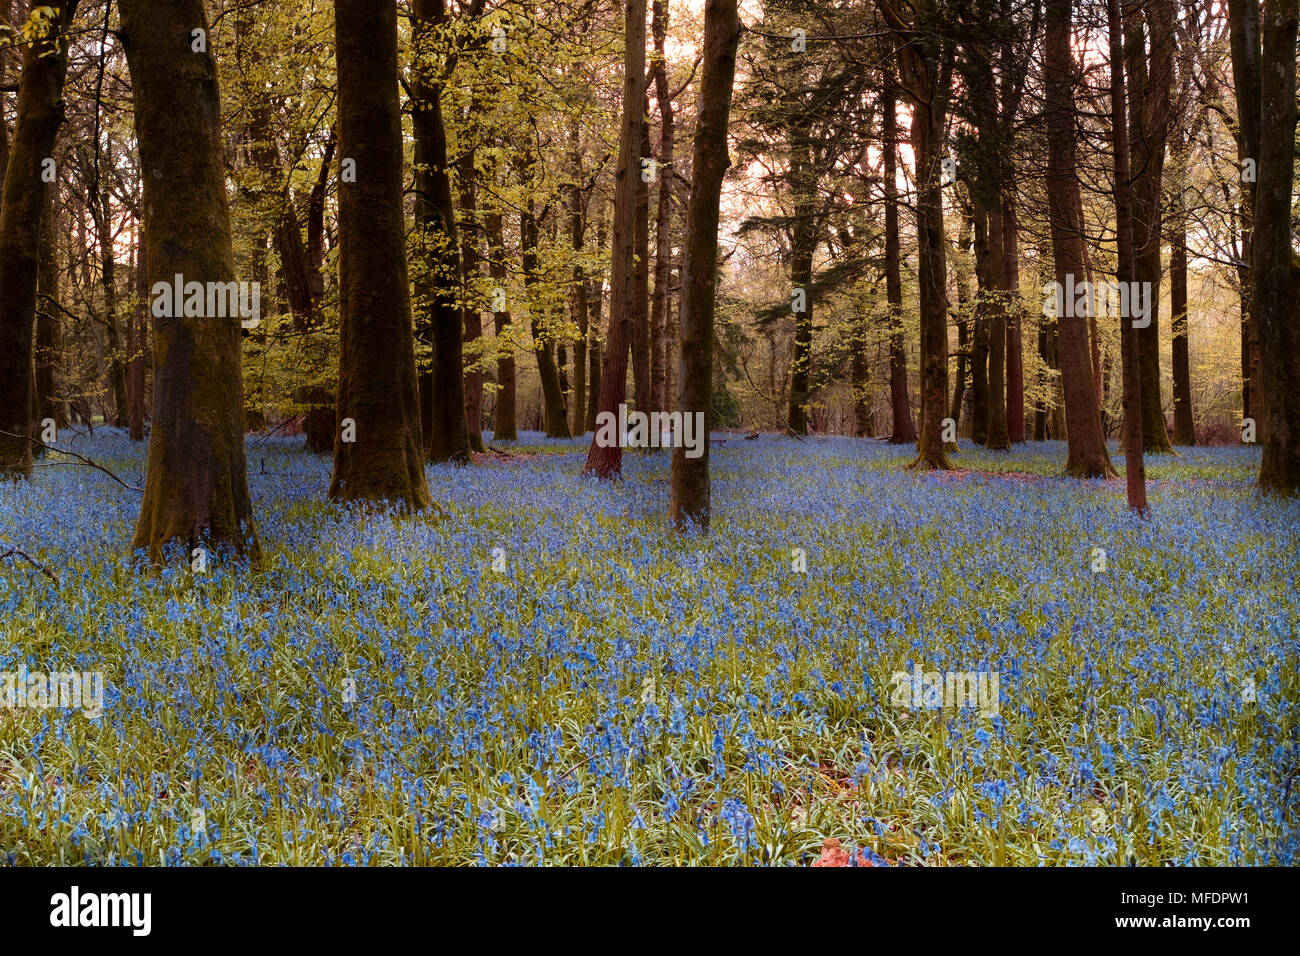 Groverly Woods Great Wishford Nr Salisbury. 25th Apr, 2018. UK Weather Groverly Woods Great Wishford Nr Salisbury. Very lush bluebells in the setting sun after heavy rain during the day. Credit Paul Chambers Alamy Live News Stock Photo